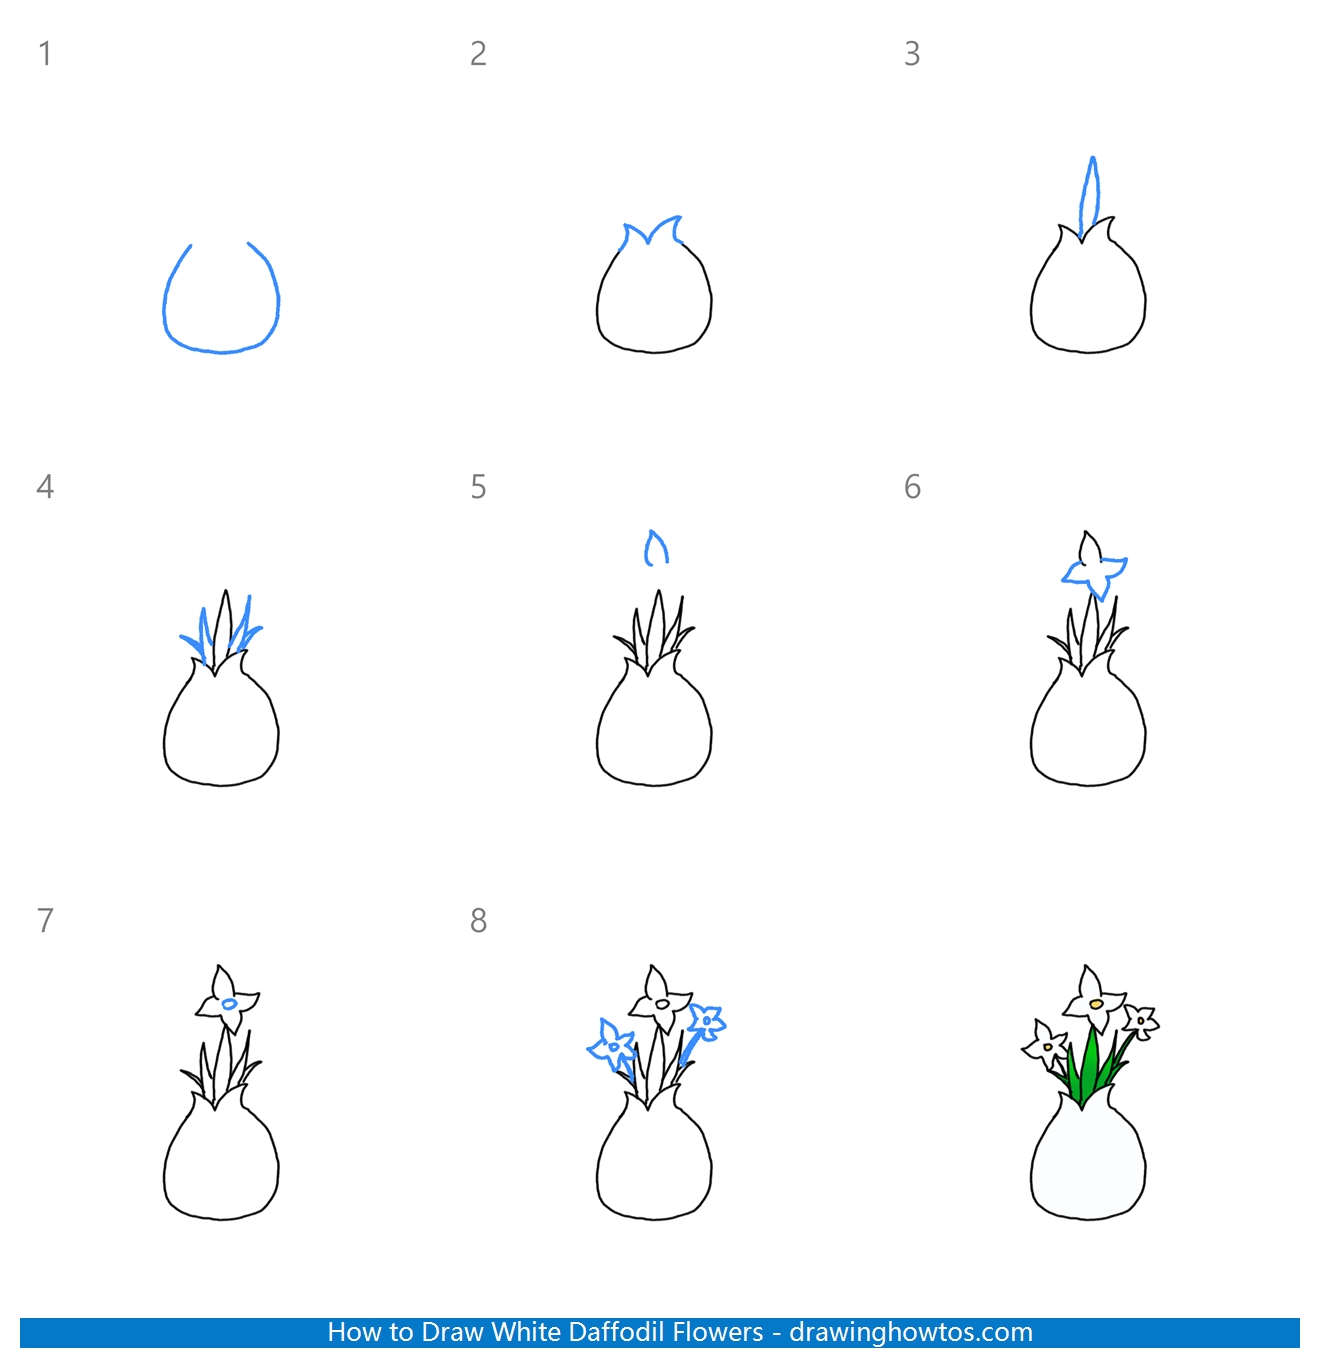 How to Draw White Narcissus Flowers Step by Step Easy Drawing Guides